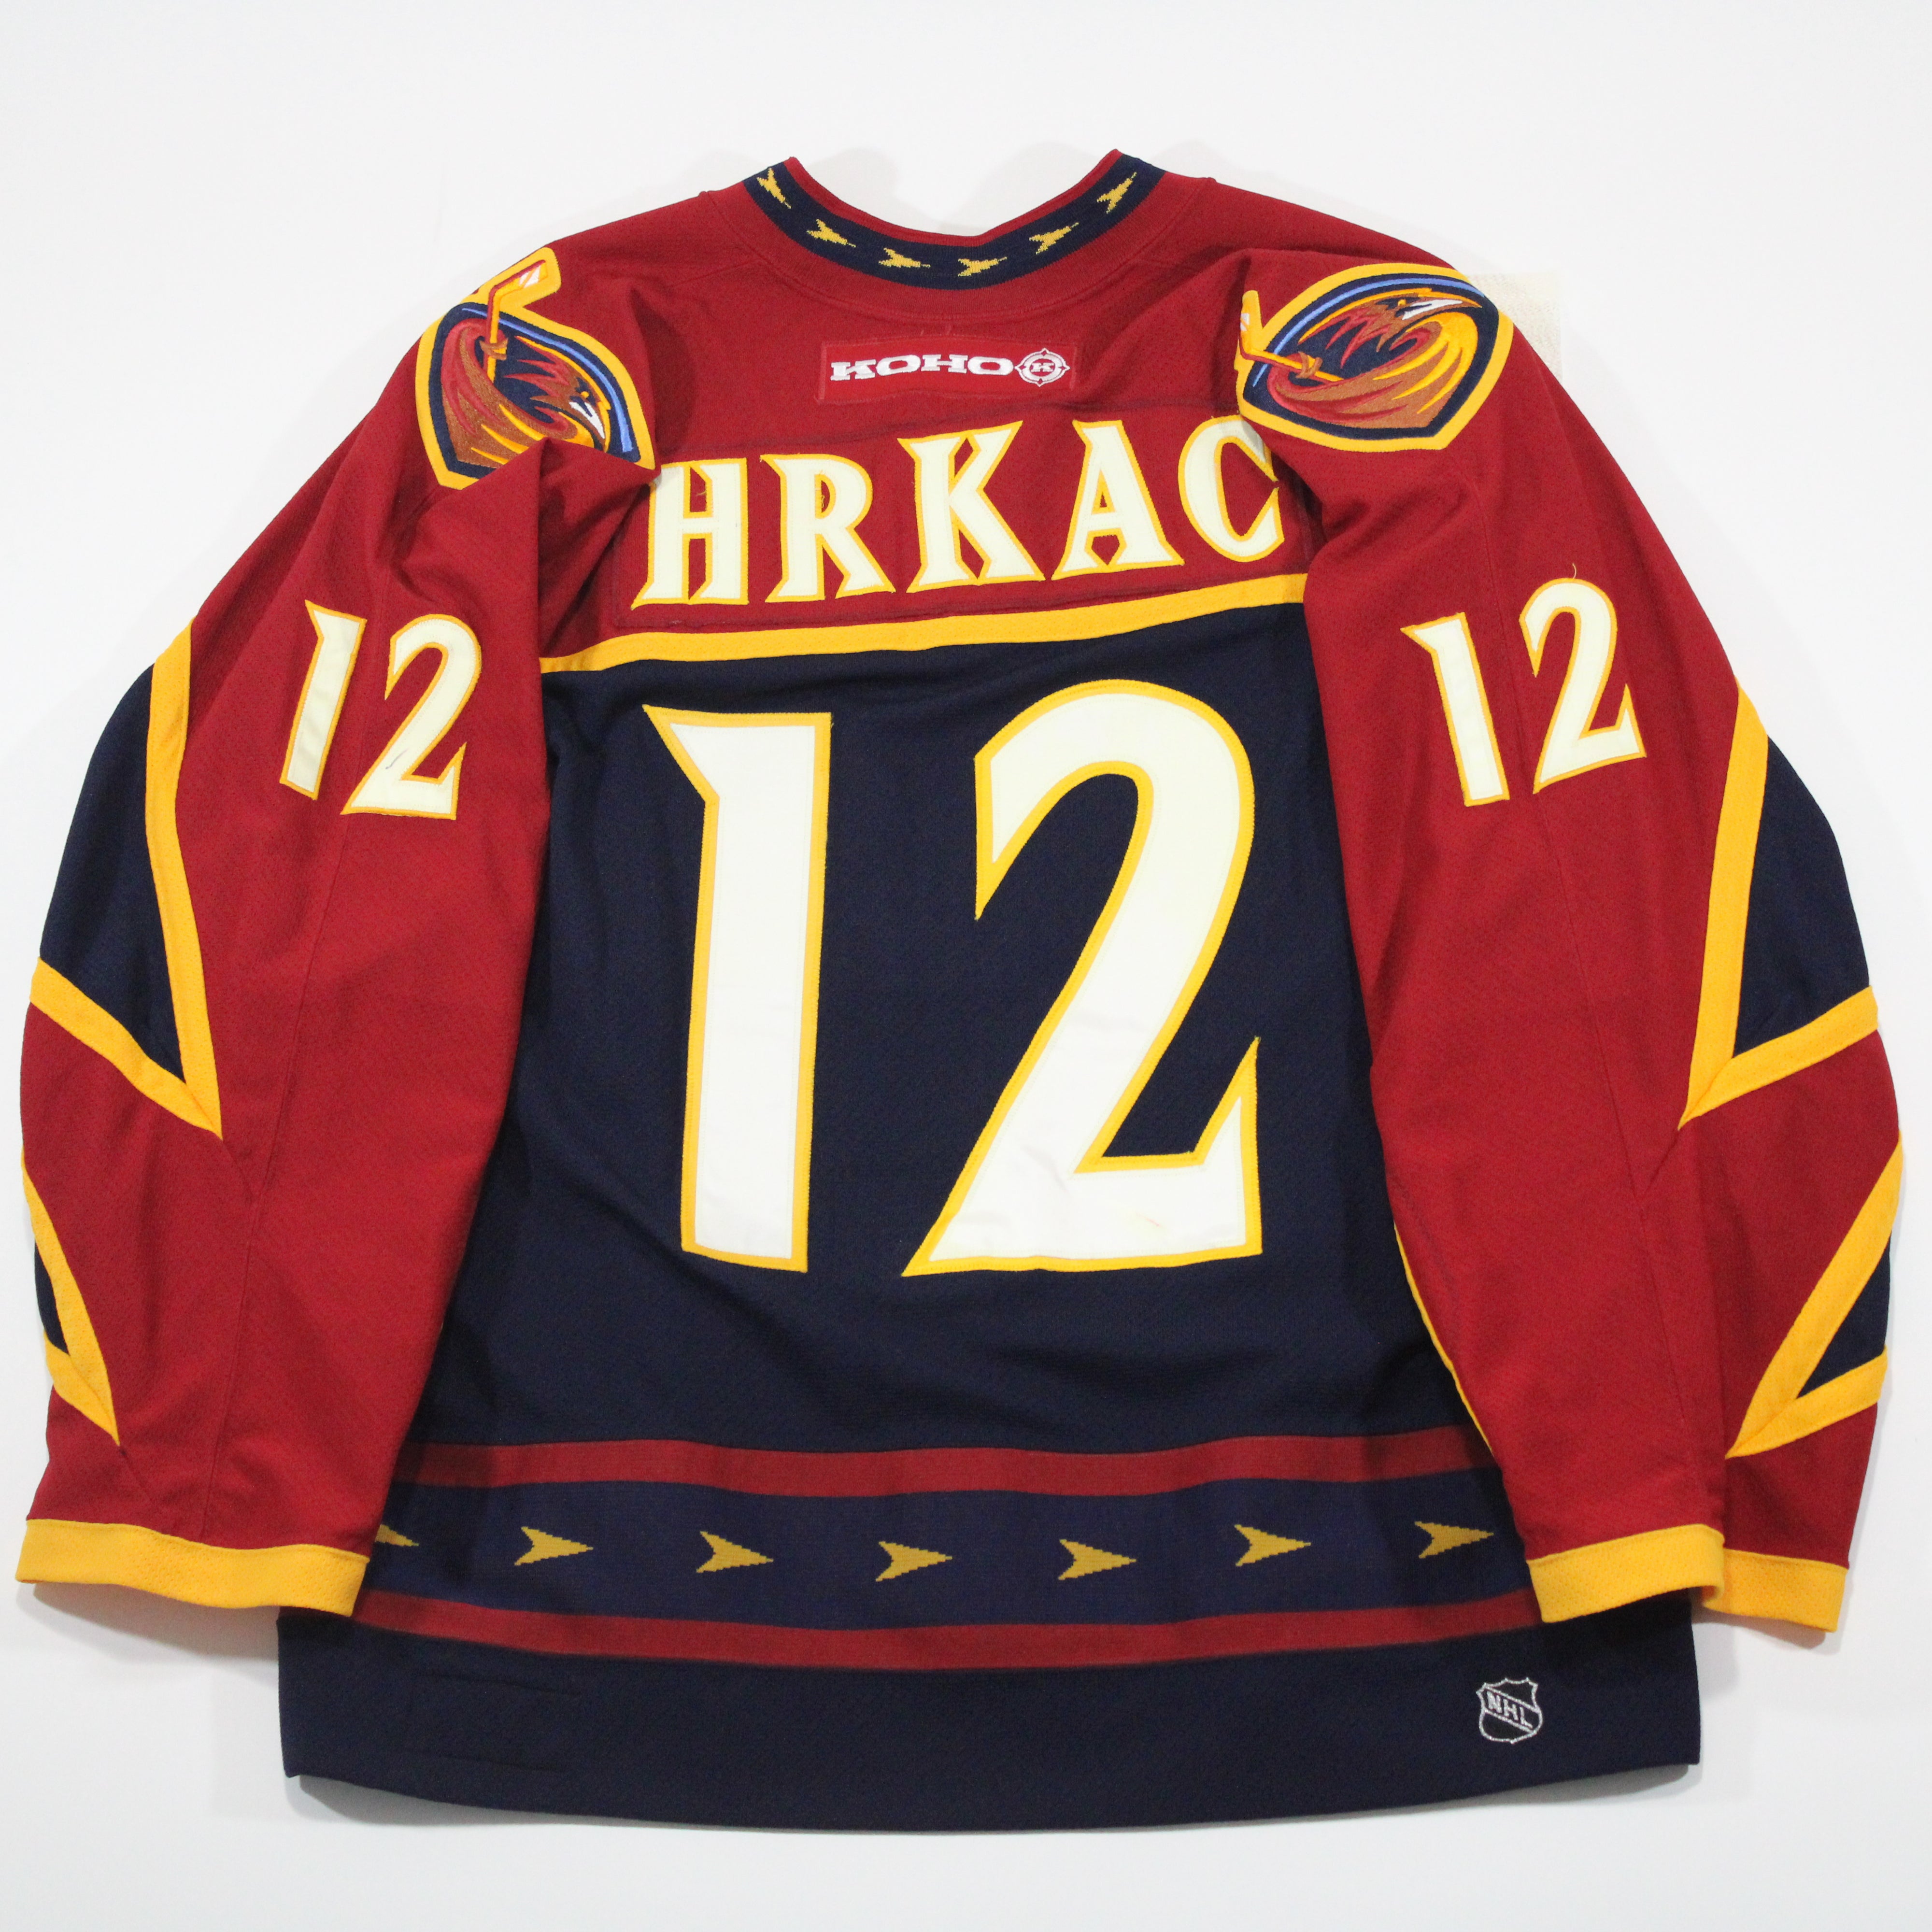 Atlanta Thrashers on X: 🚨GIVEAWAY🚨 We've teamed up with @RazzallOfficial  to give away an Atlanta Thrashers jersey of your choice (White, Navy, or  Blue)! To enter: 1. Follow @RazzallOfficial and @NotThrashers 2.